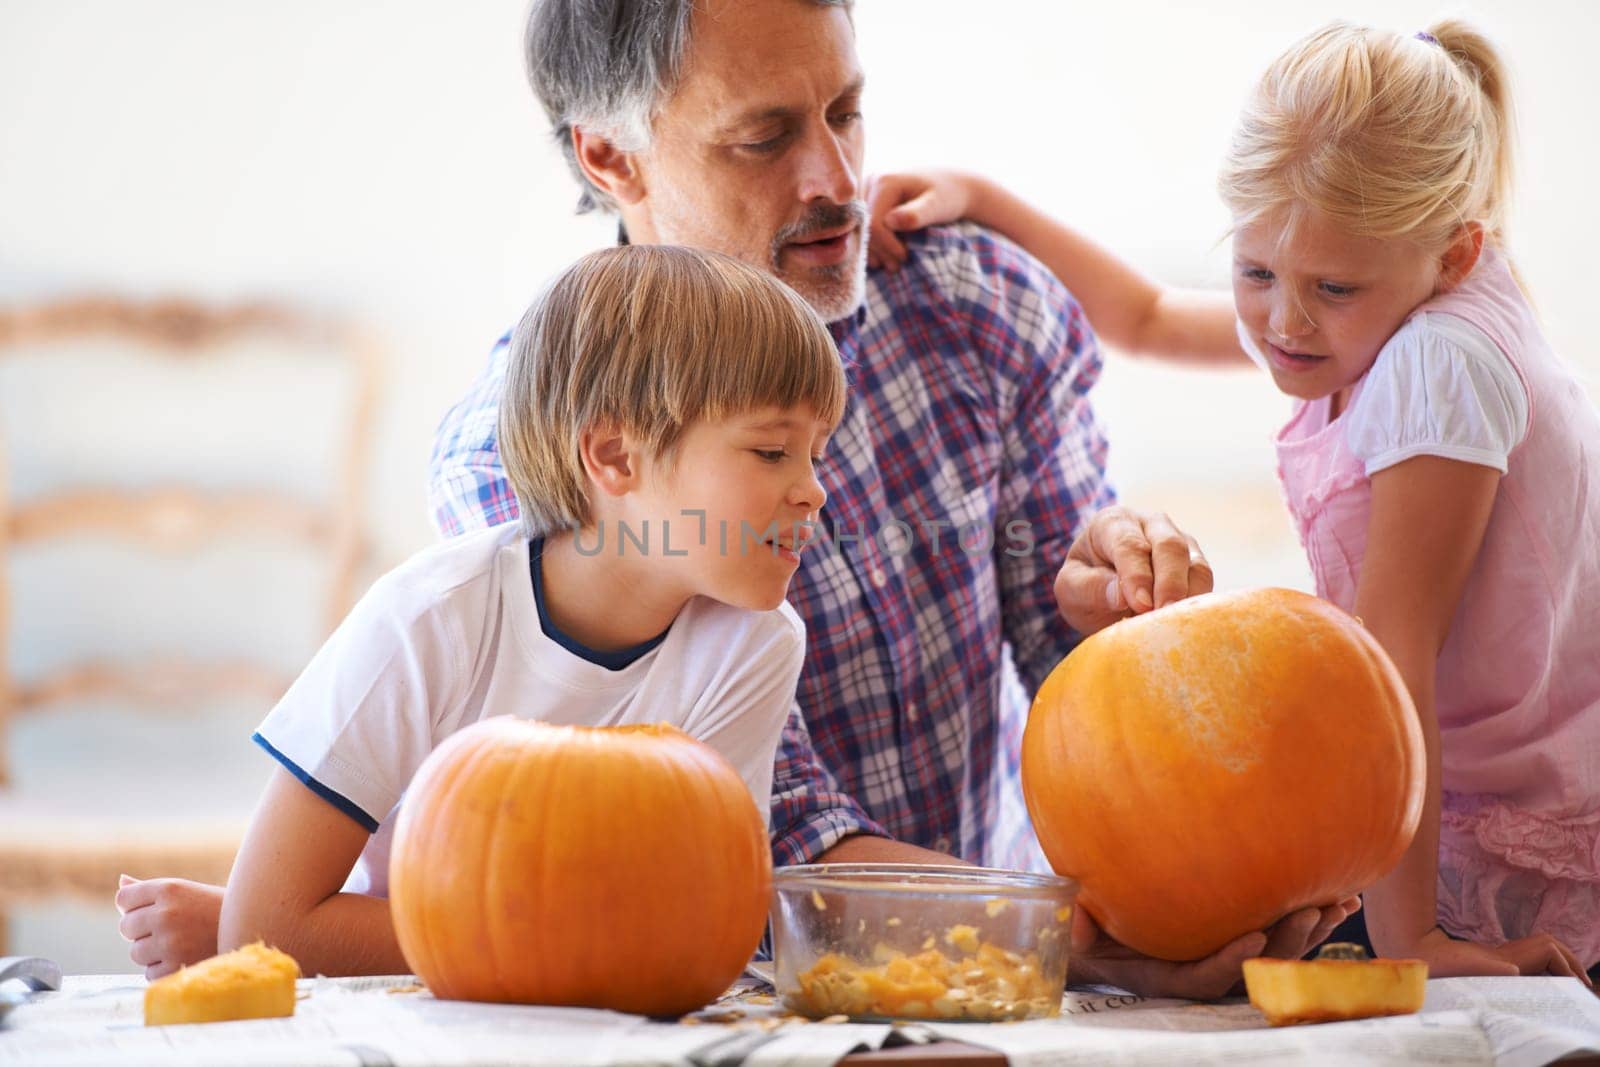 Halloween, family and carving a pumpkin with children at a home table for fun and bonding. Man or dad helping or teaching young kids with creativity, holiday lantern and craft together in a house.